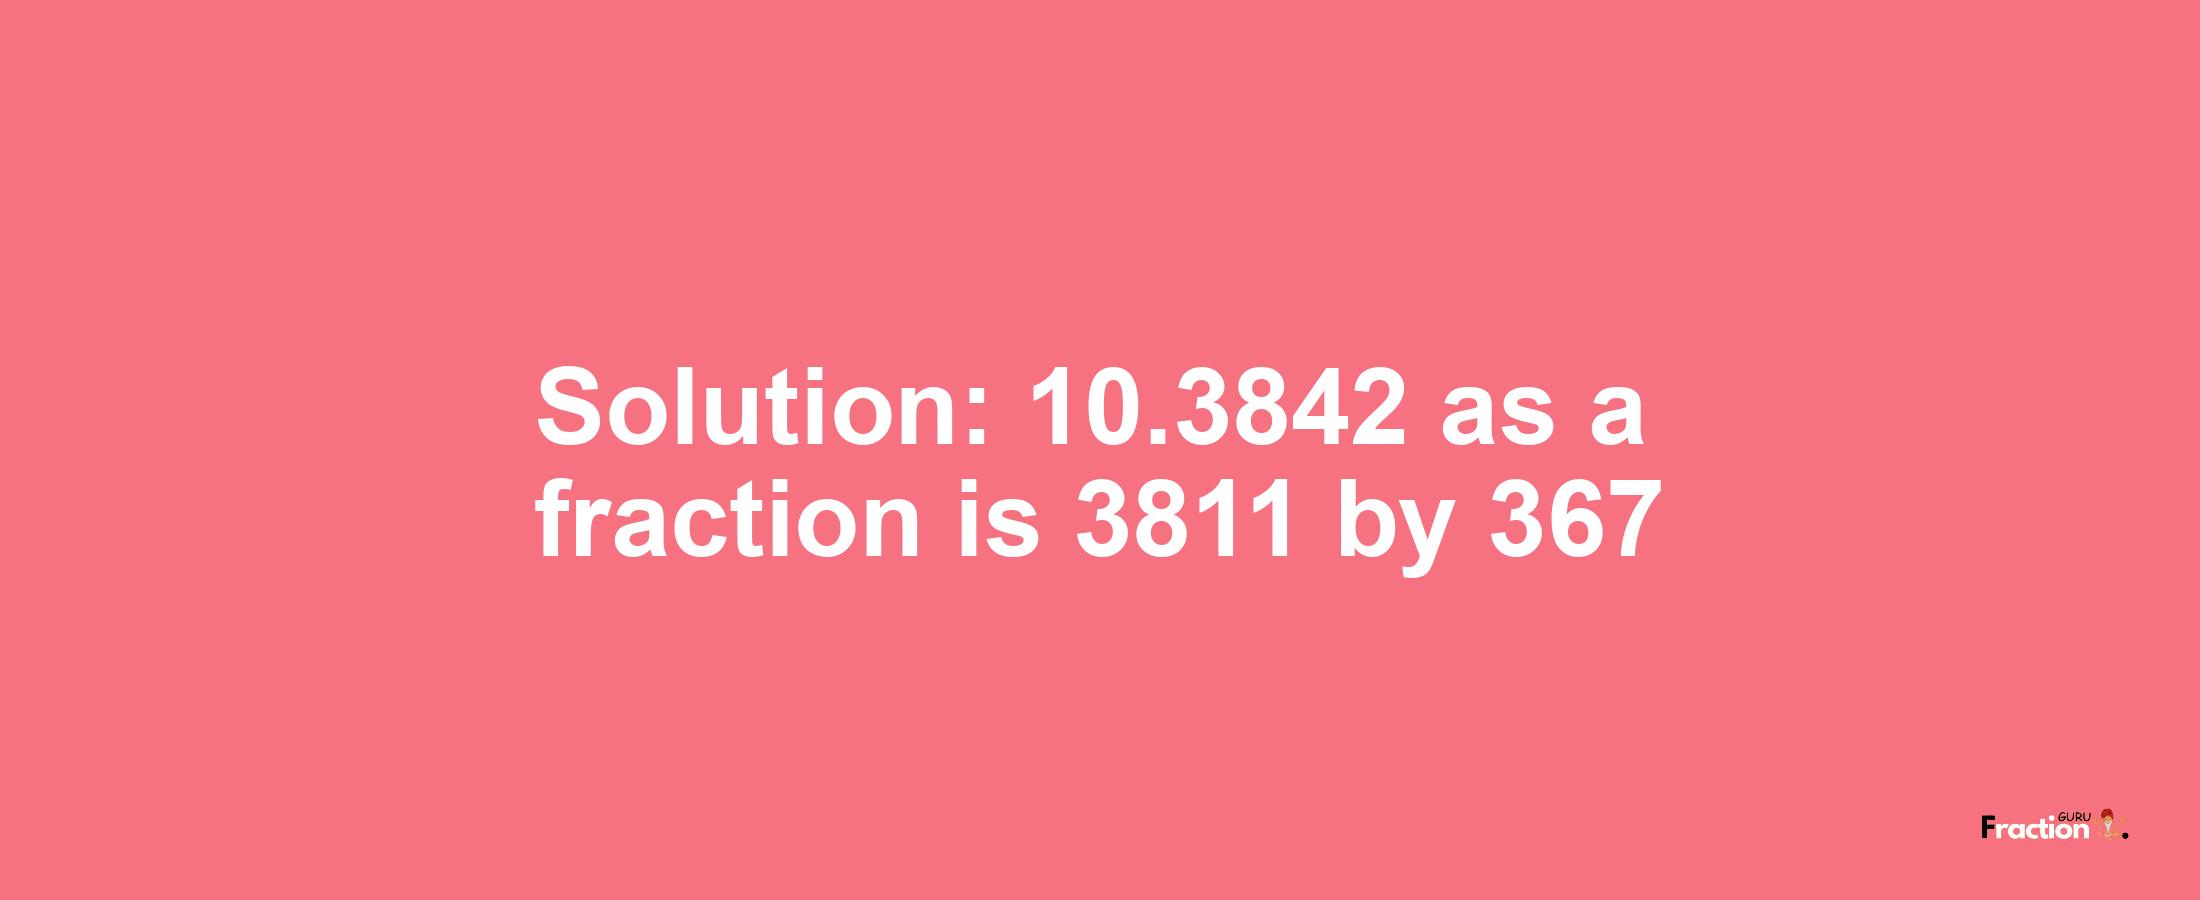 Solution:10.3842 as a fraction is 3811/367